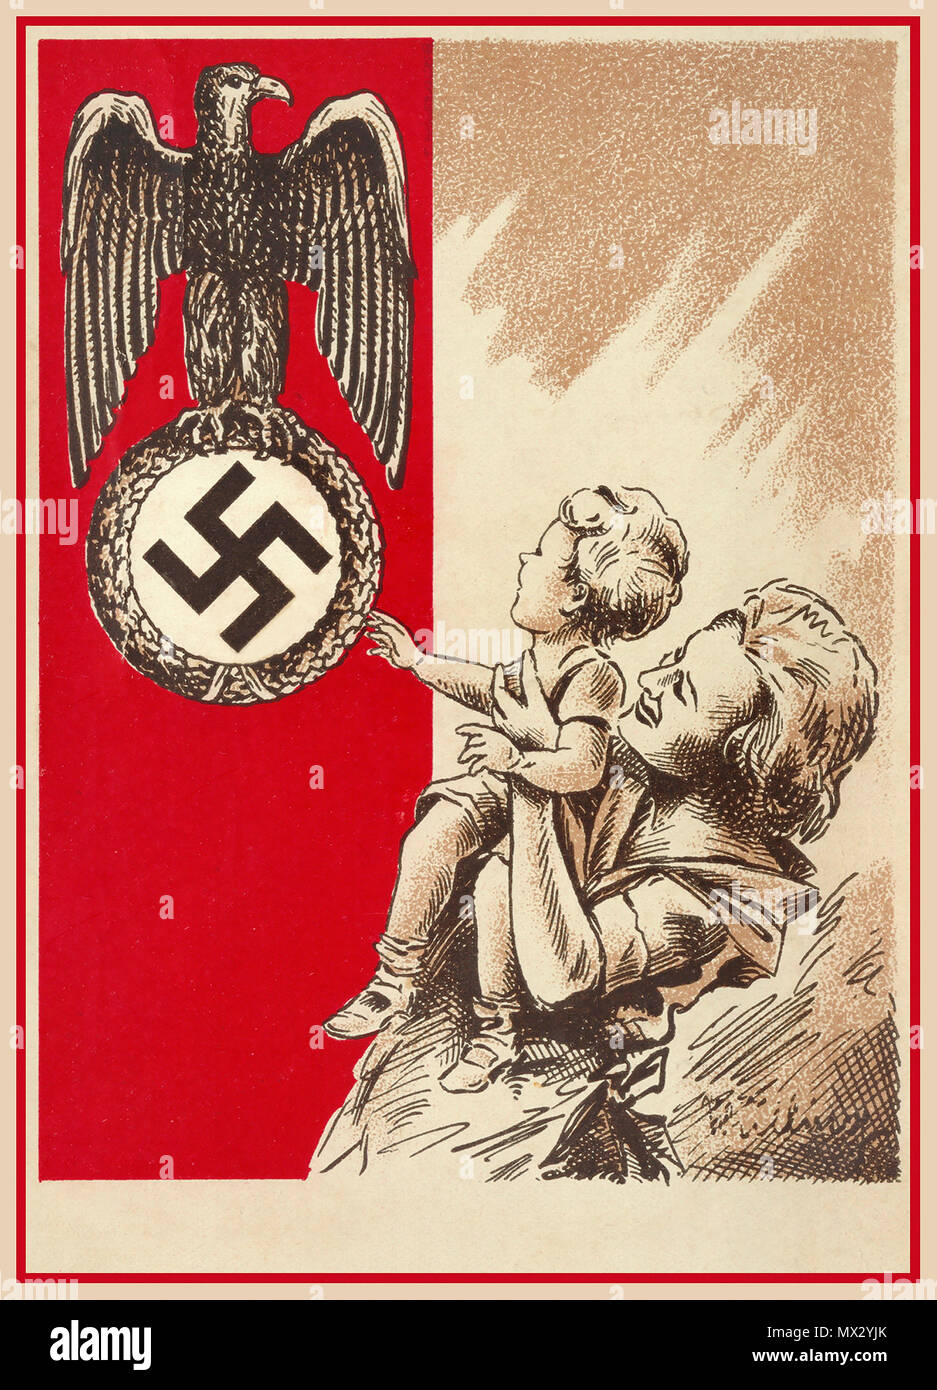 SWASTIKA FAMILY 1939 Propaganda Postcard Nazi Germany showing a mother and child with the Fatherland Nazi Eagle and Swastika as a National Guardian Symbol to be revered respected and admired... Stock Photo